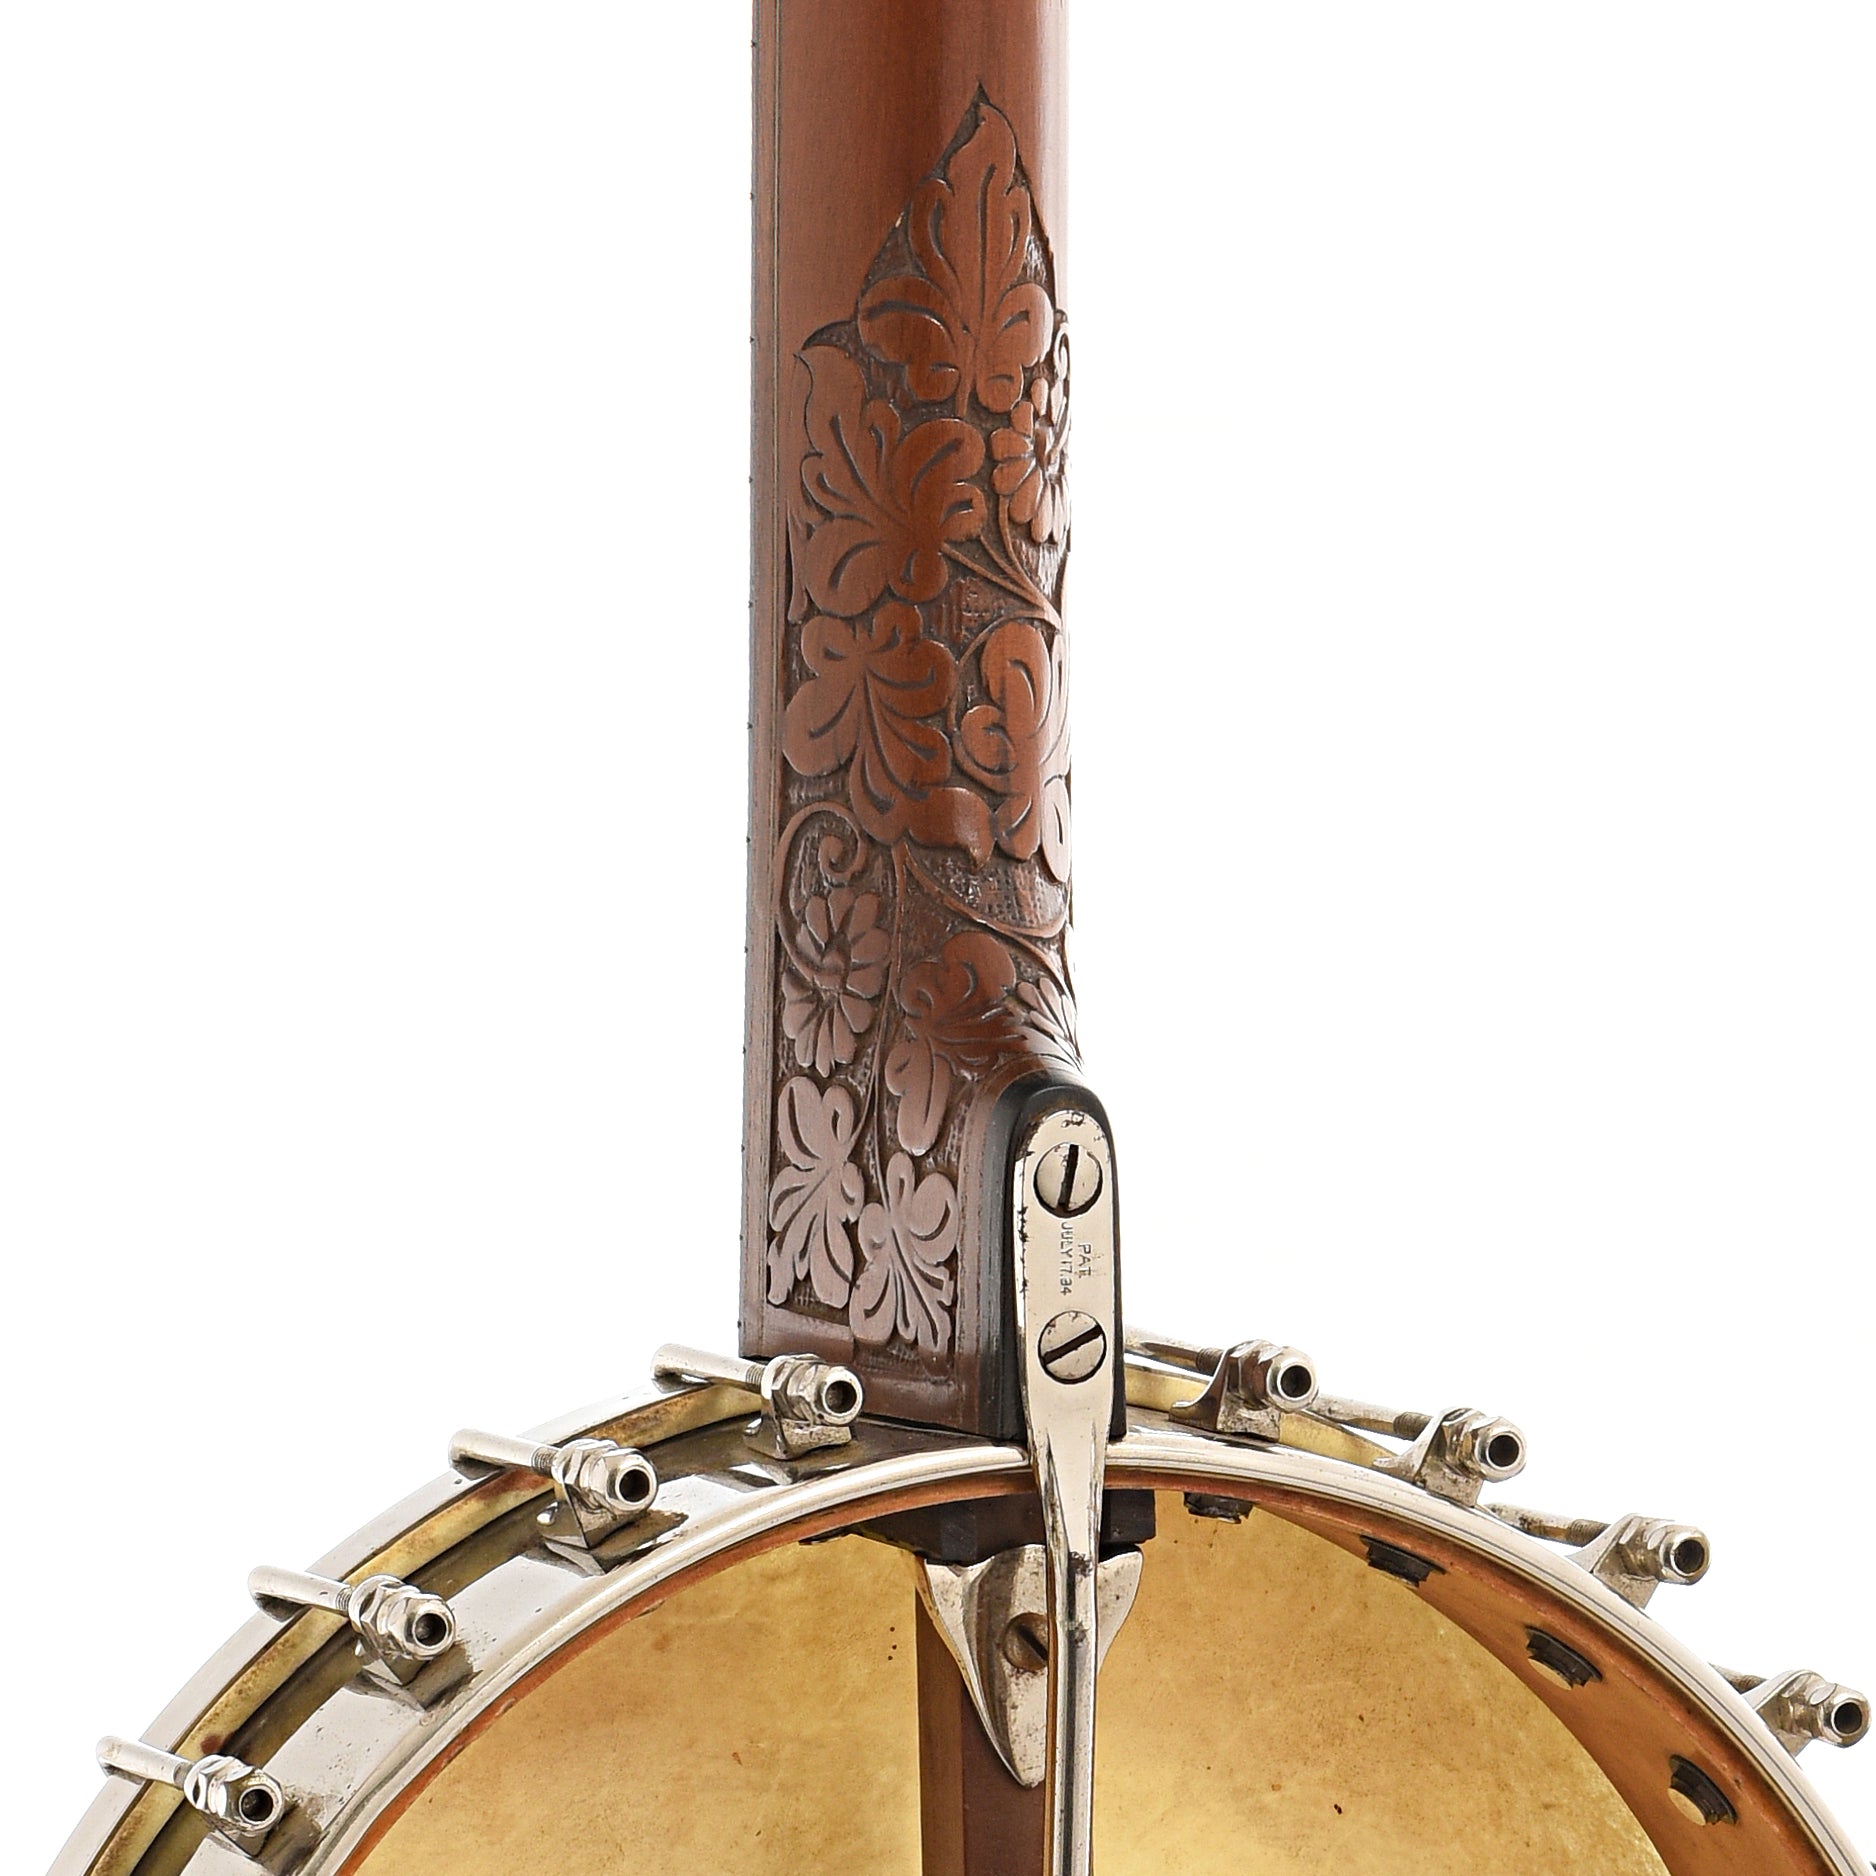 Nek joint of S.S. Stewart Special Thoroughbred Open Back Banjo (c.1890)